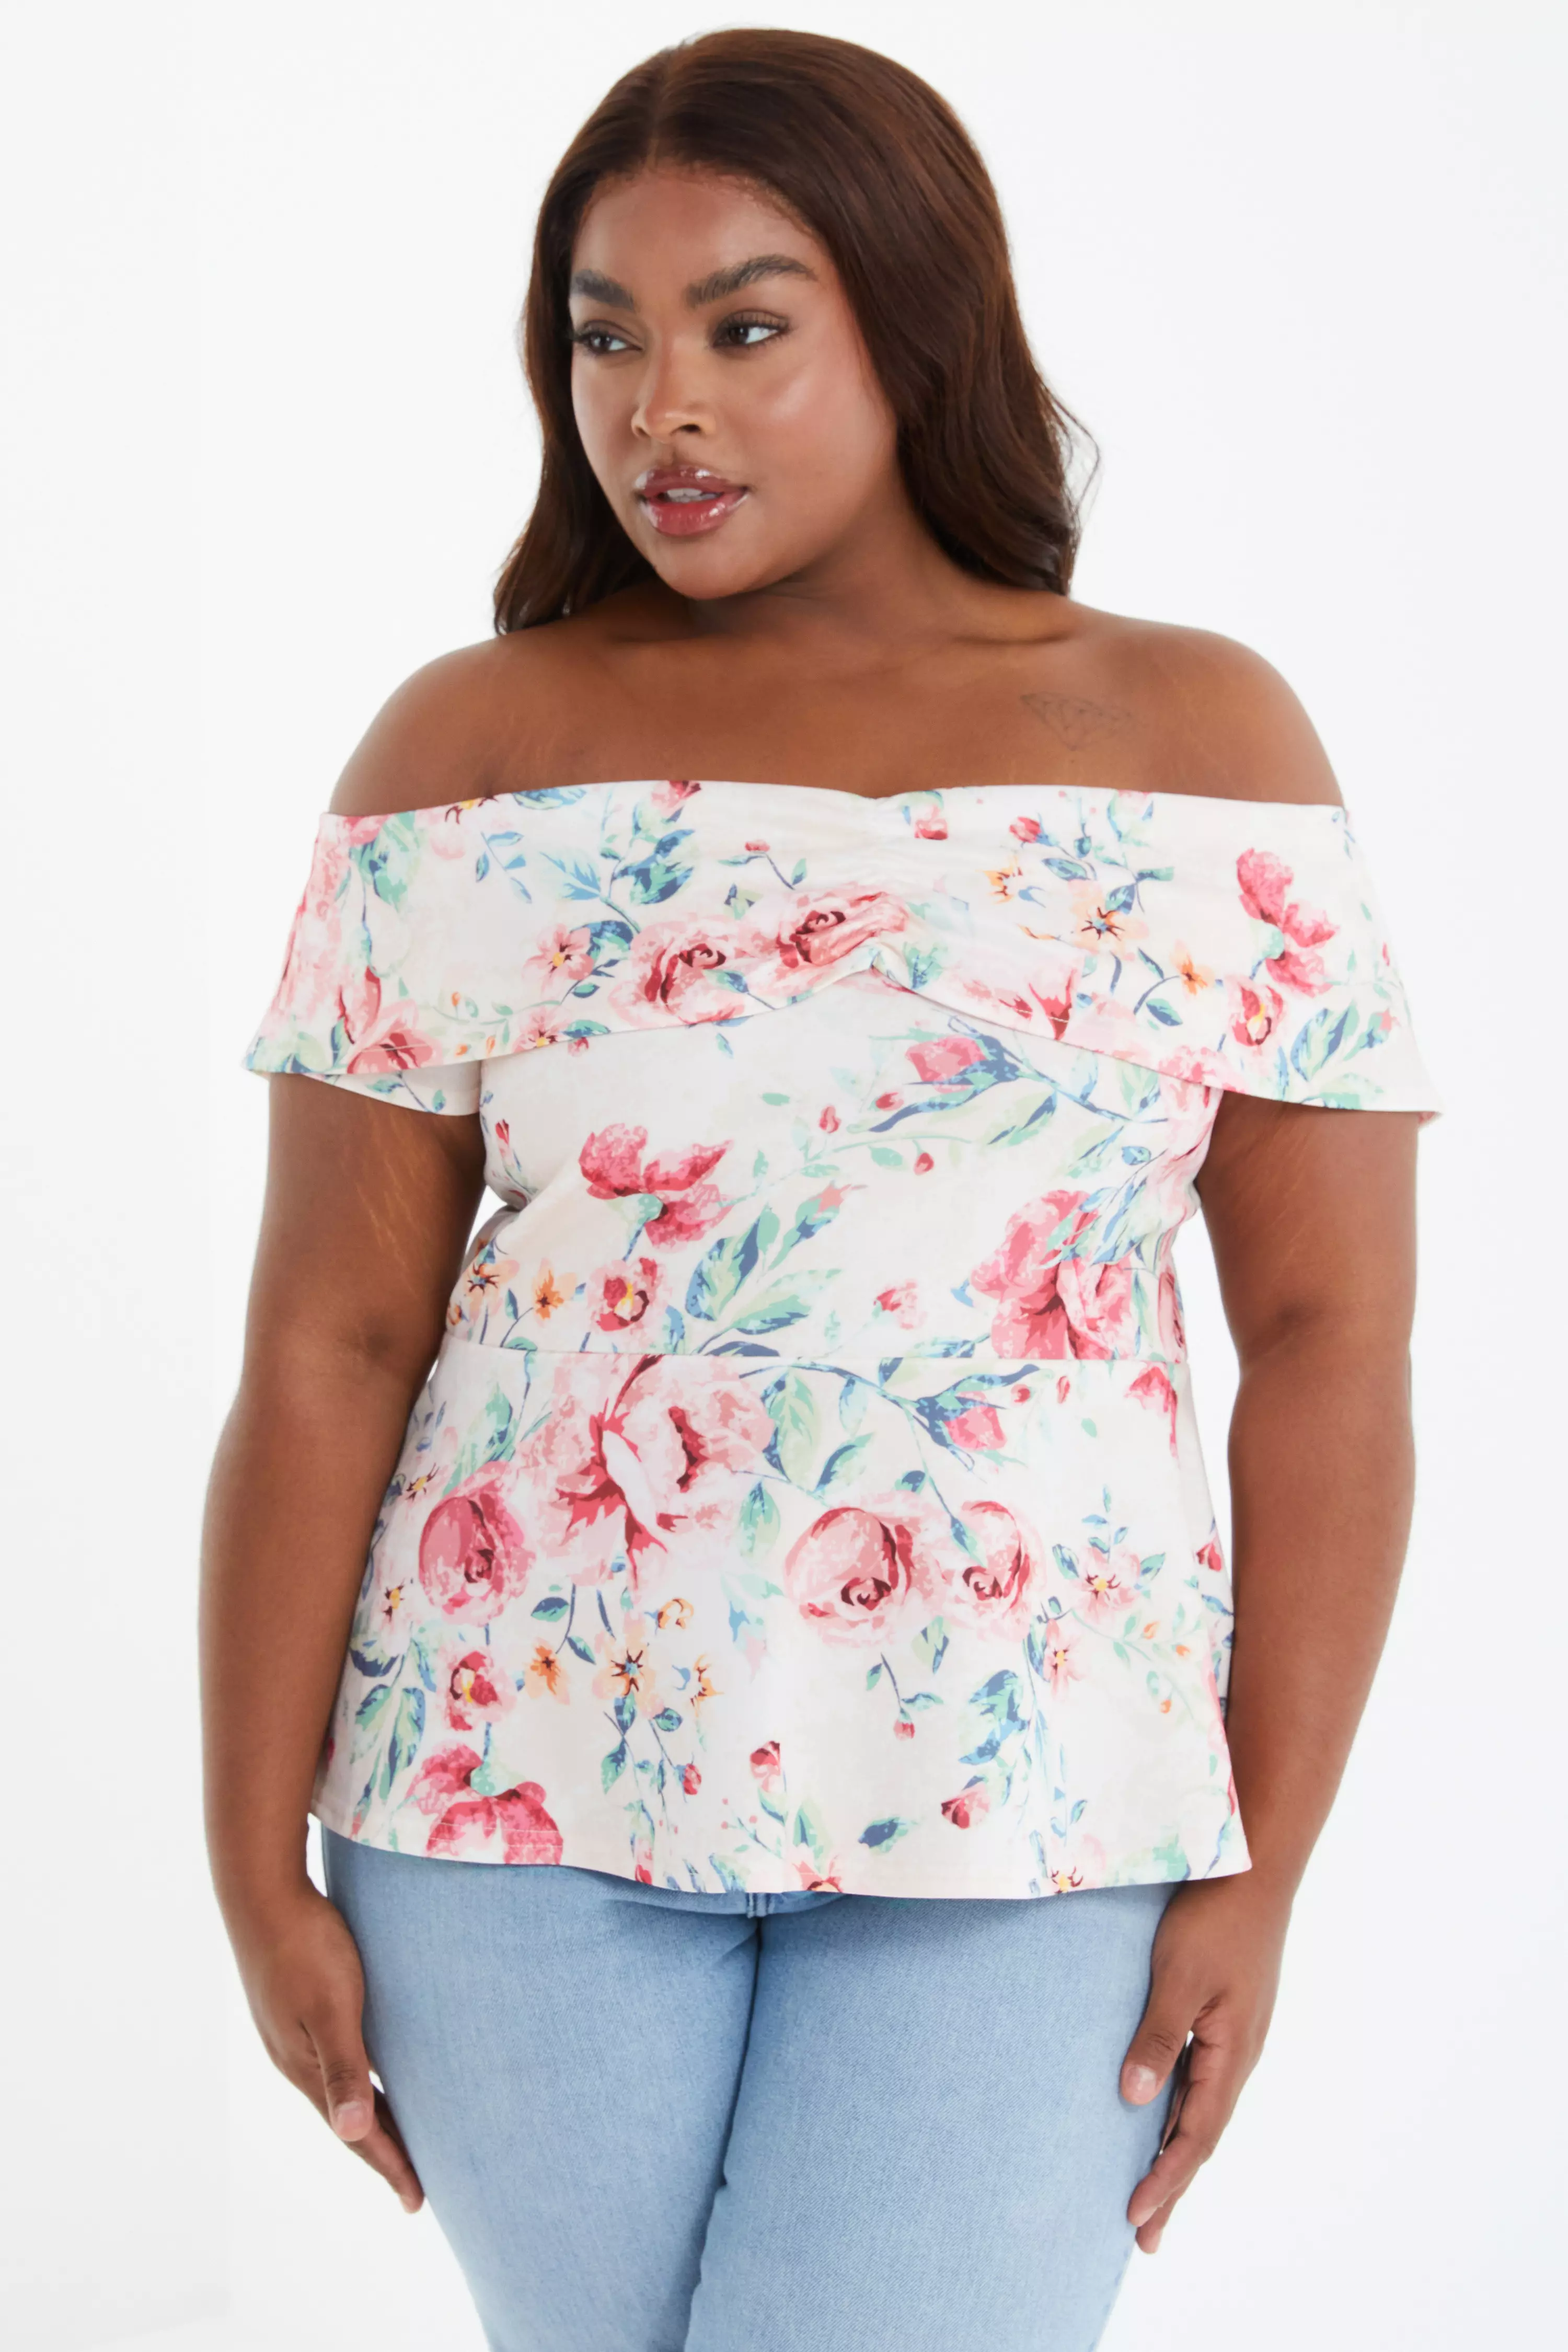 Plus Size Tops | Plus Size Party & Going Out Tops | QUIZ